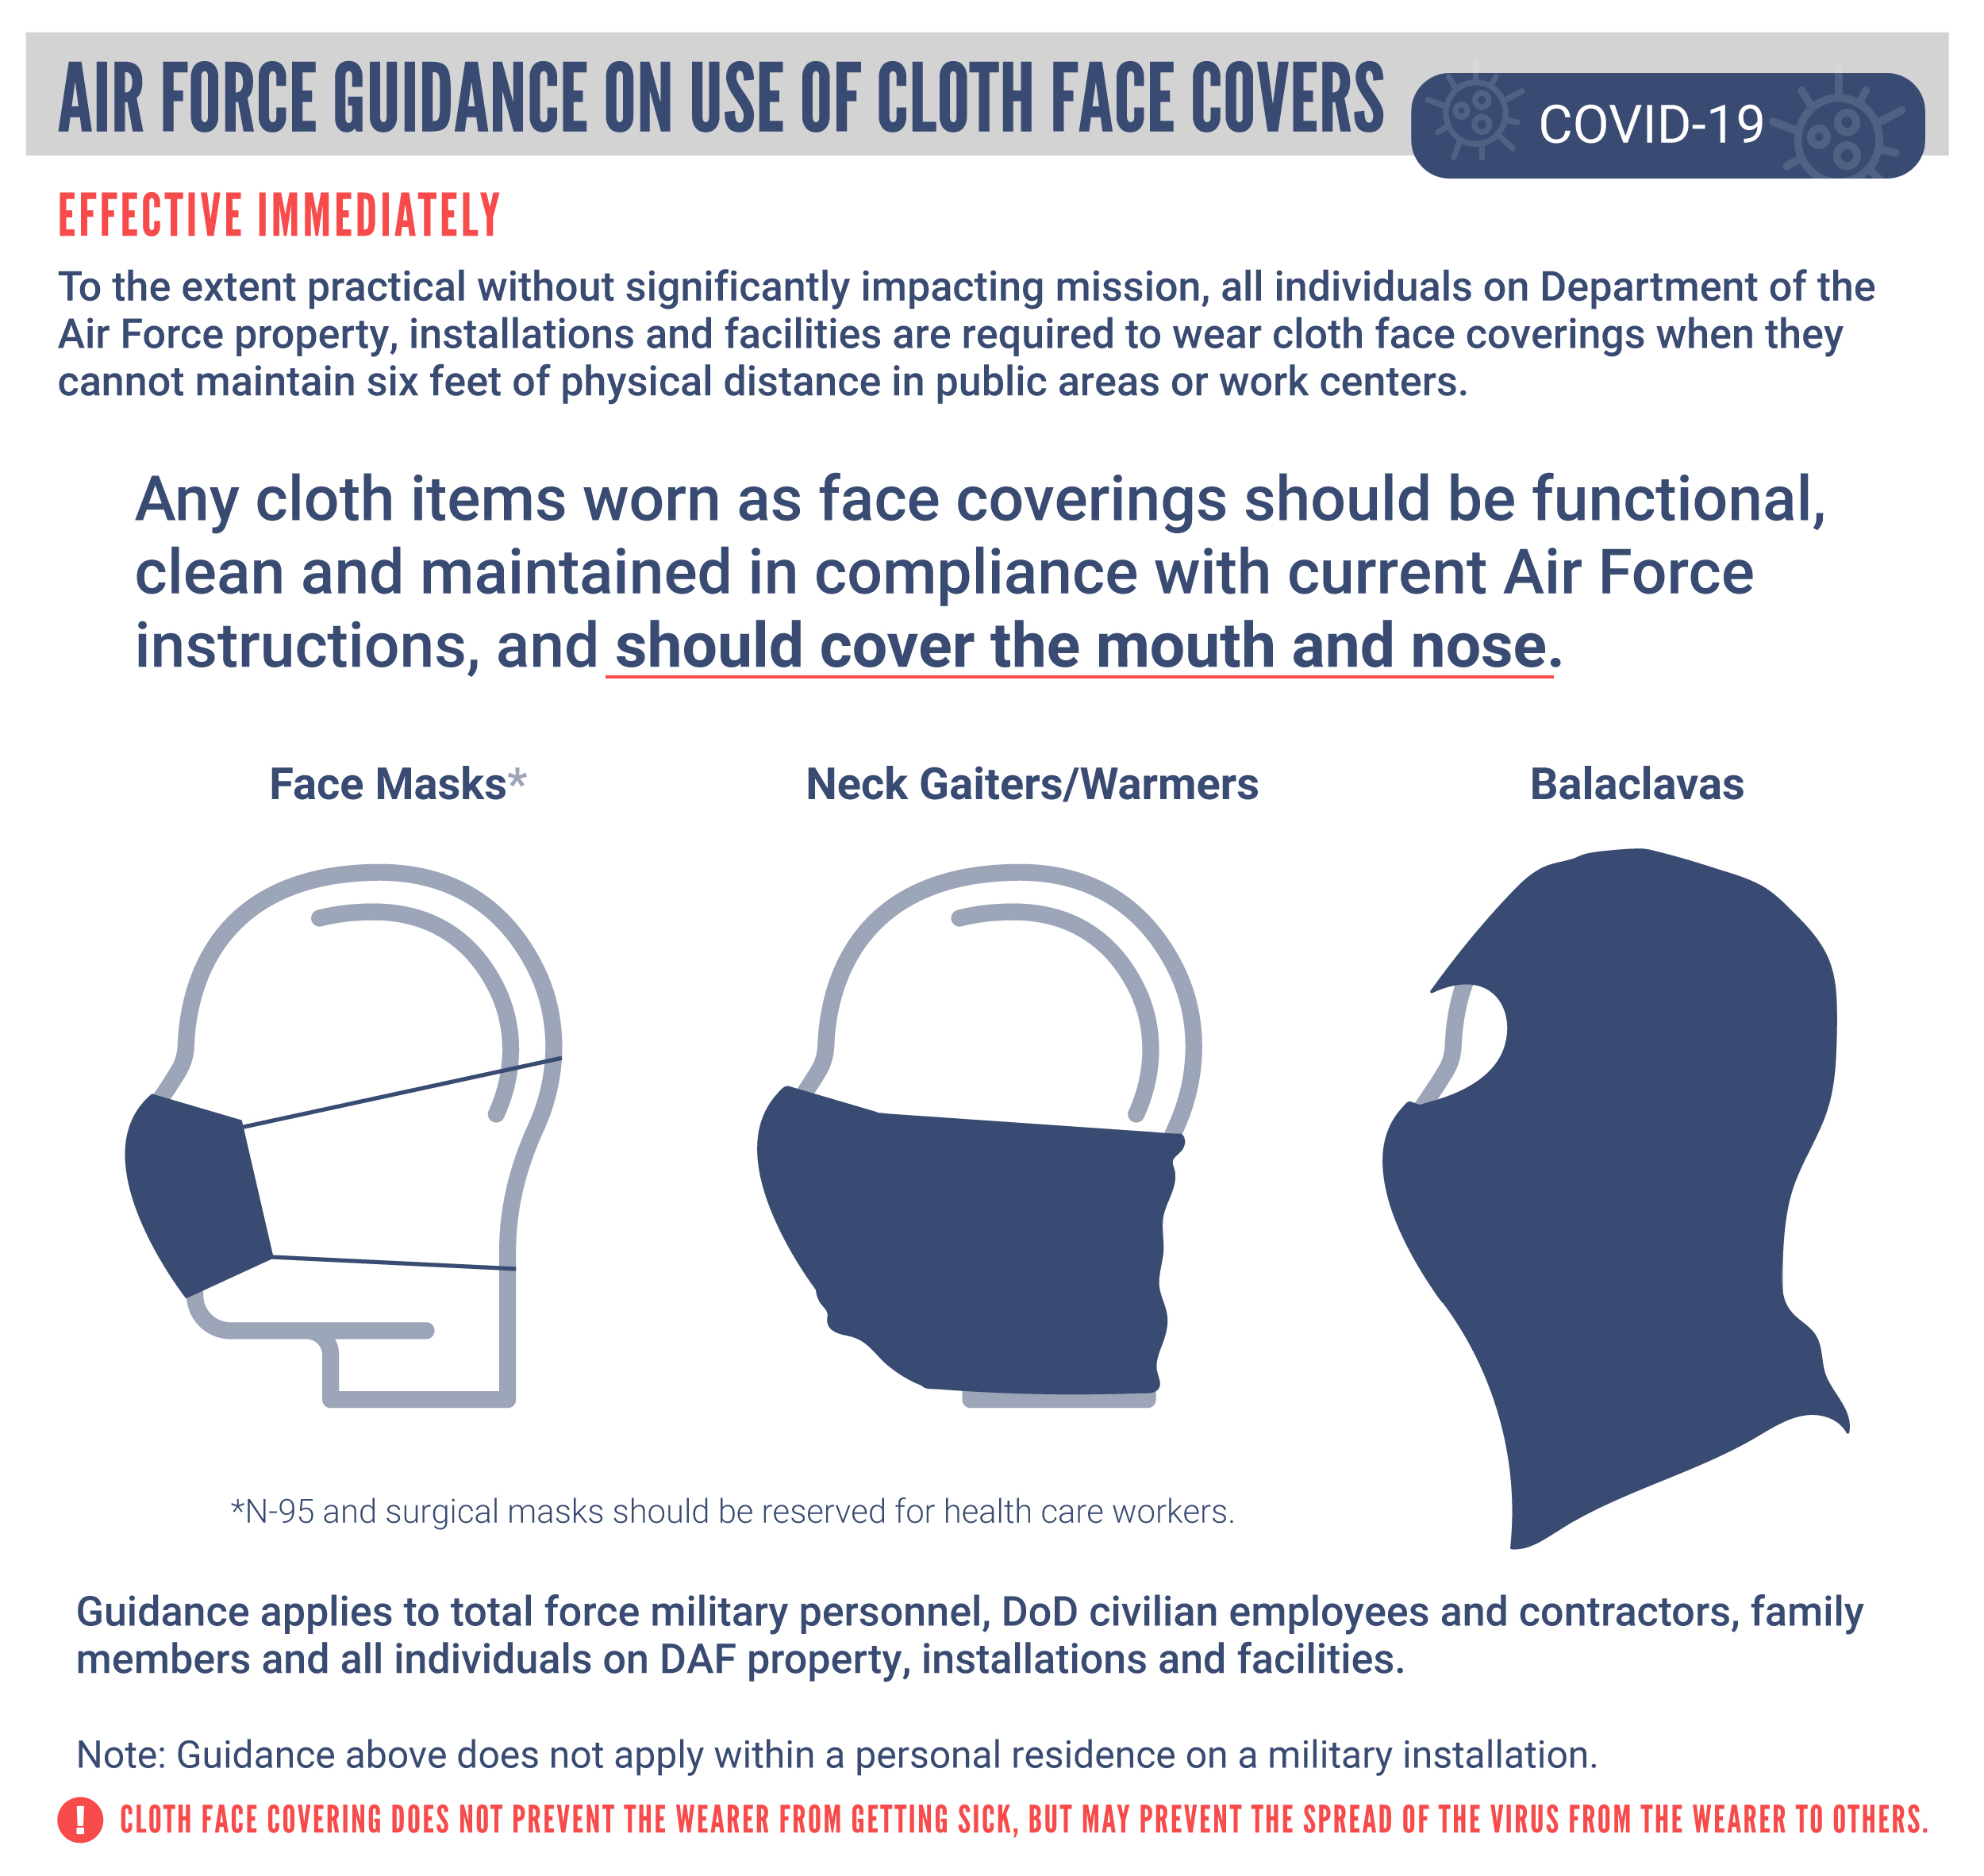 Air Force COVID-19 Face Mask Guidance